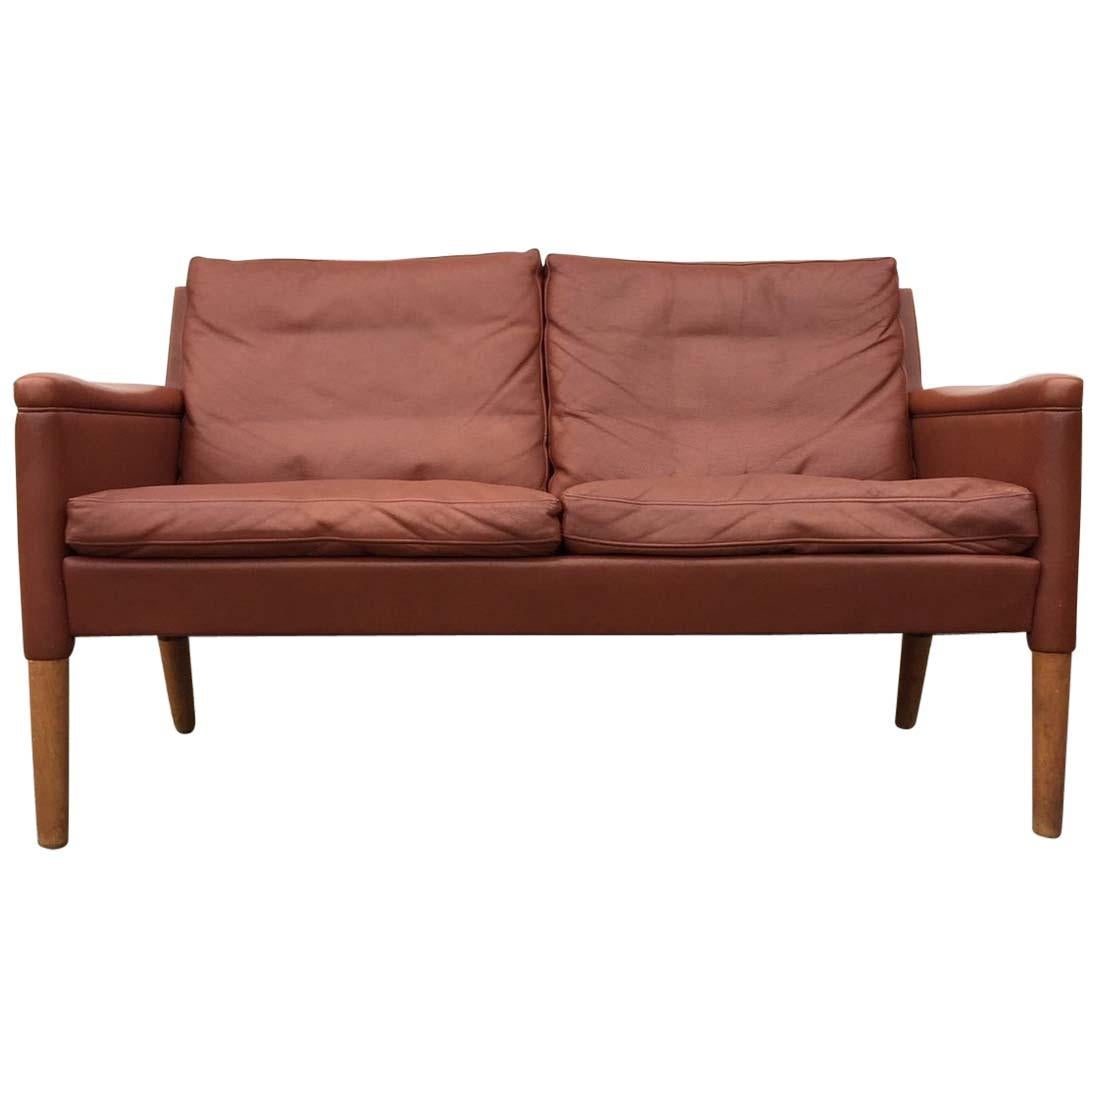 Danish Modern Settee-Sofa in Cognac Tanned Leather, Model 55 by Kurt Østervig For Sale